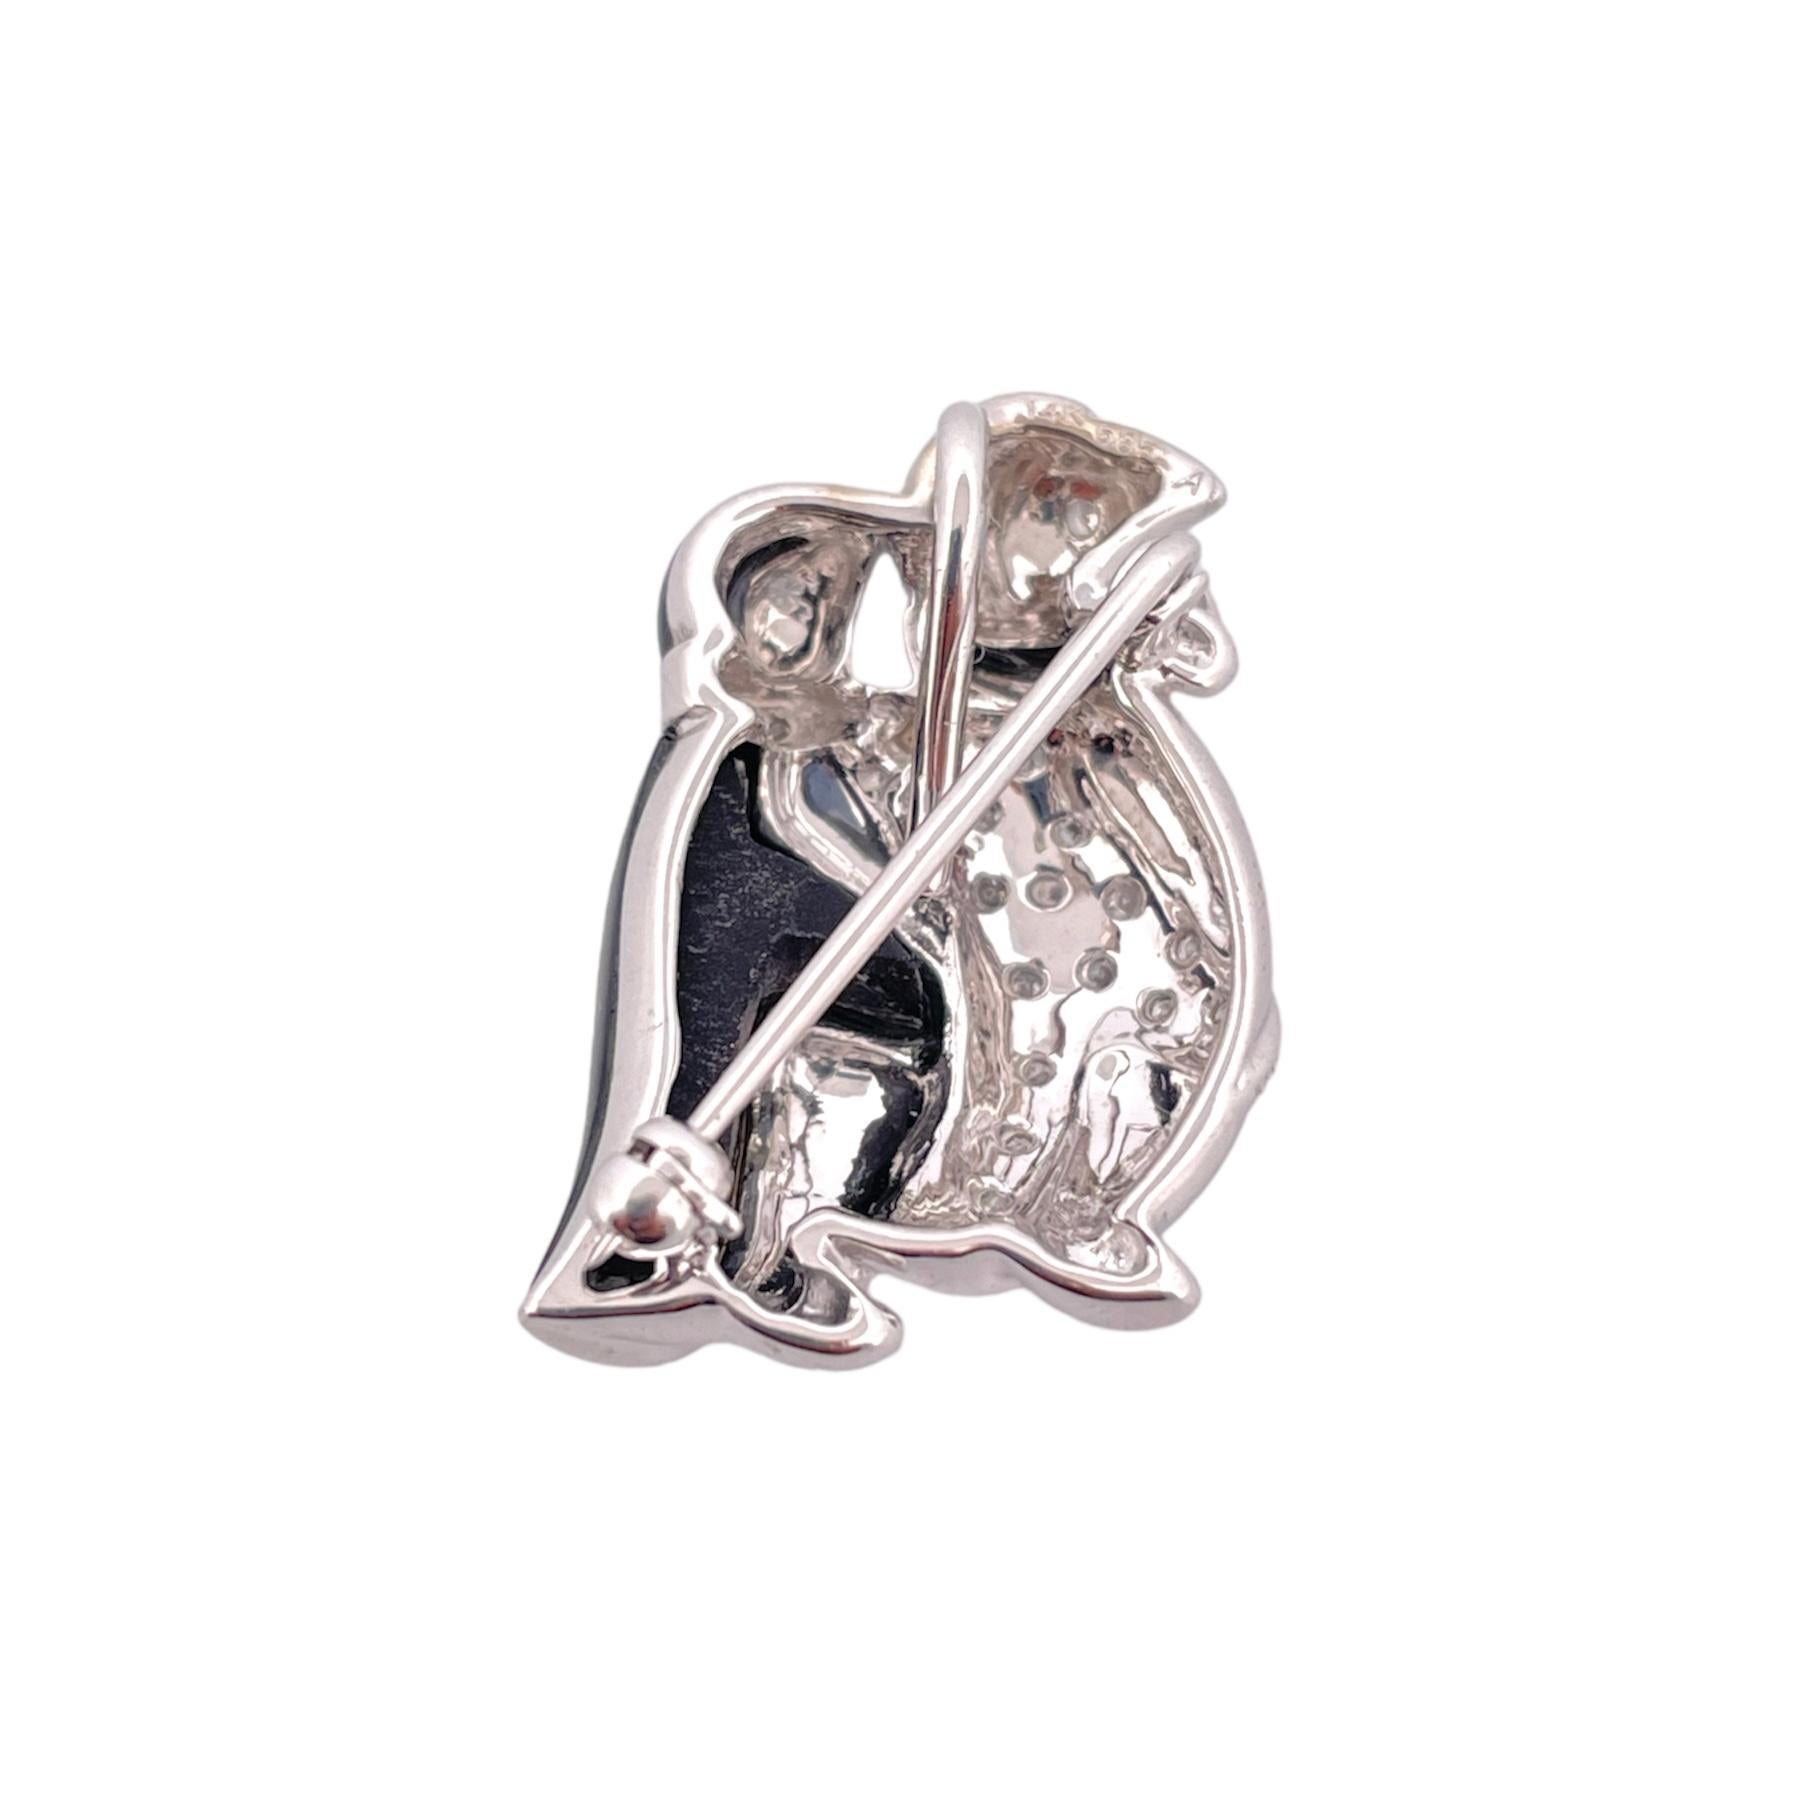 Round Cut Onyx & Diamond Penguins Brooch - 14K White Gold For Sale